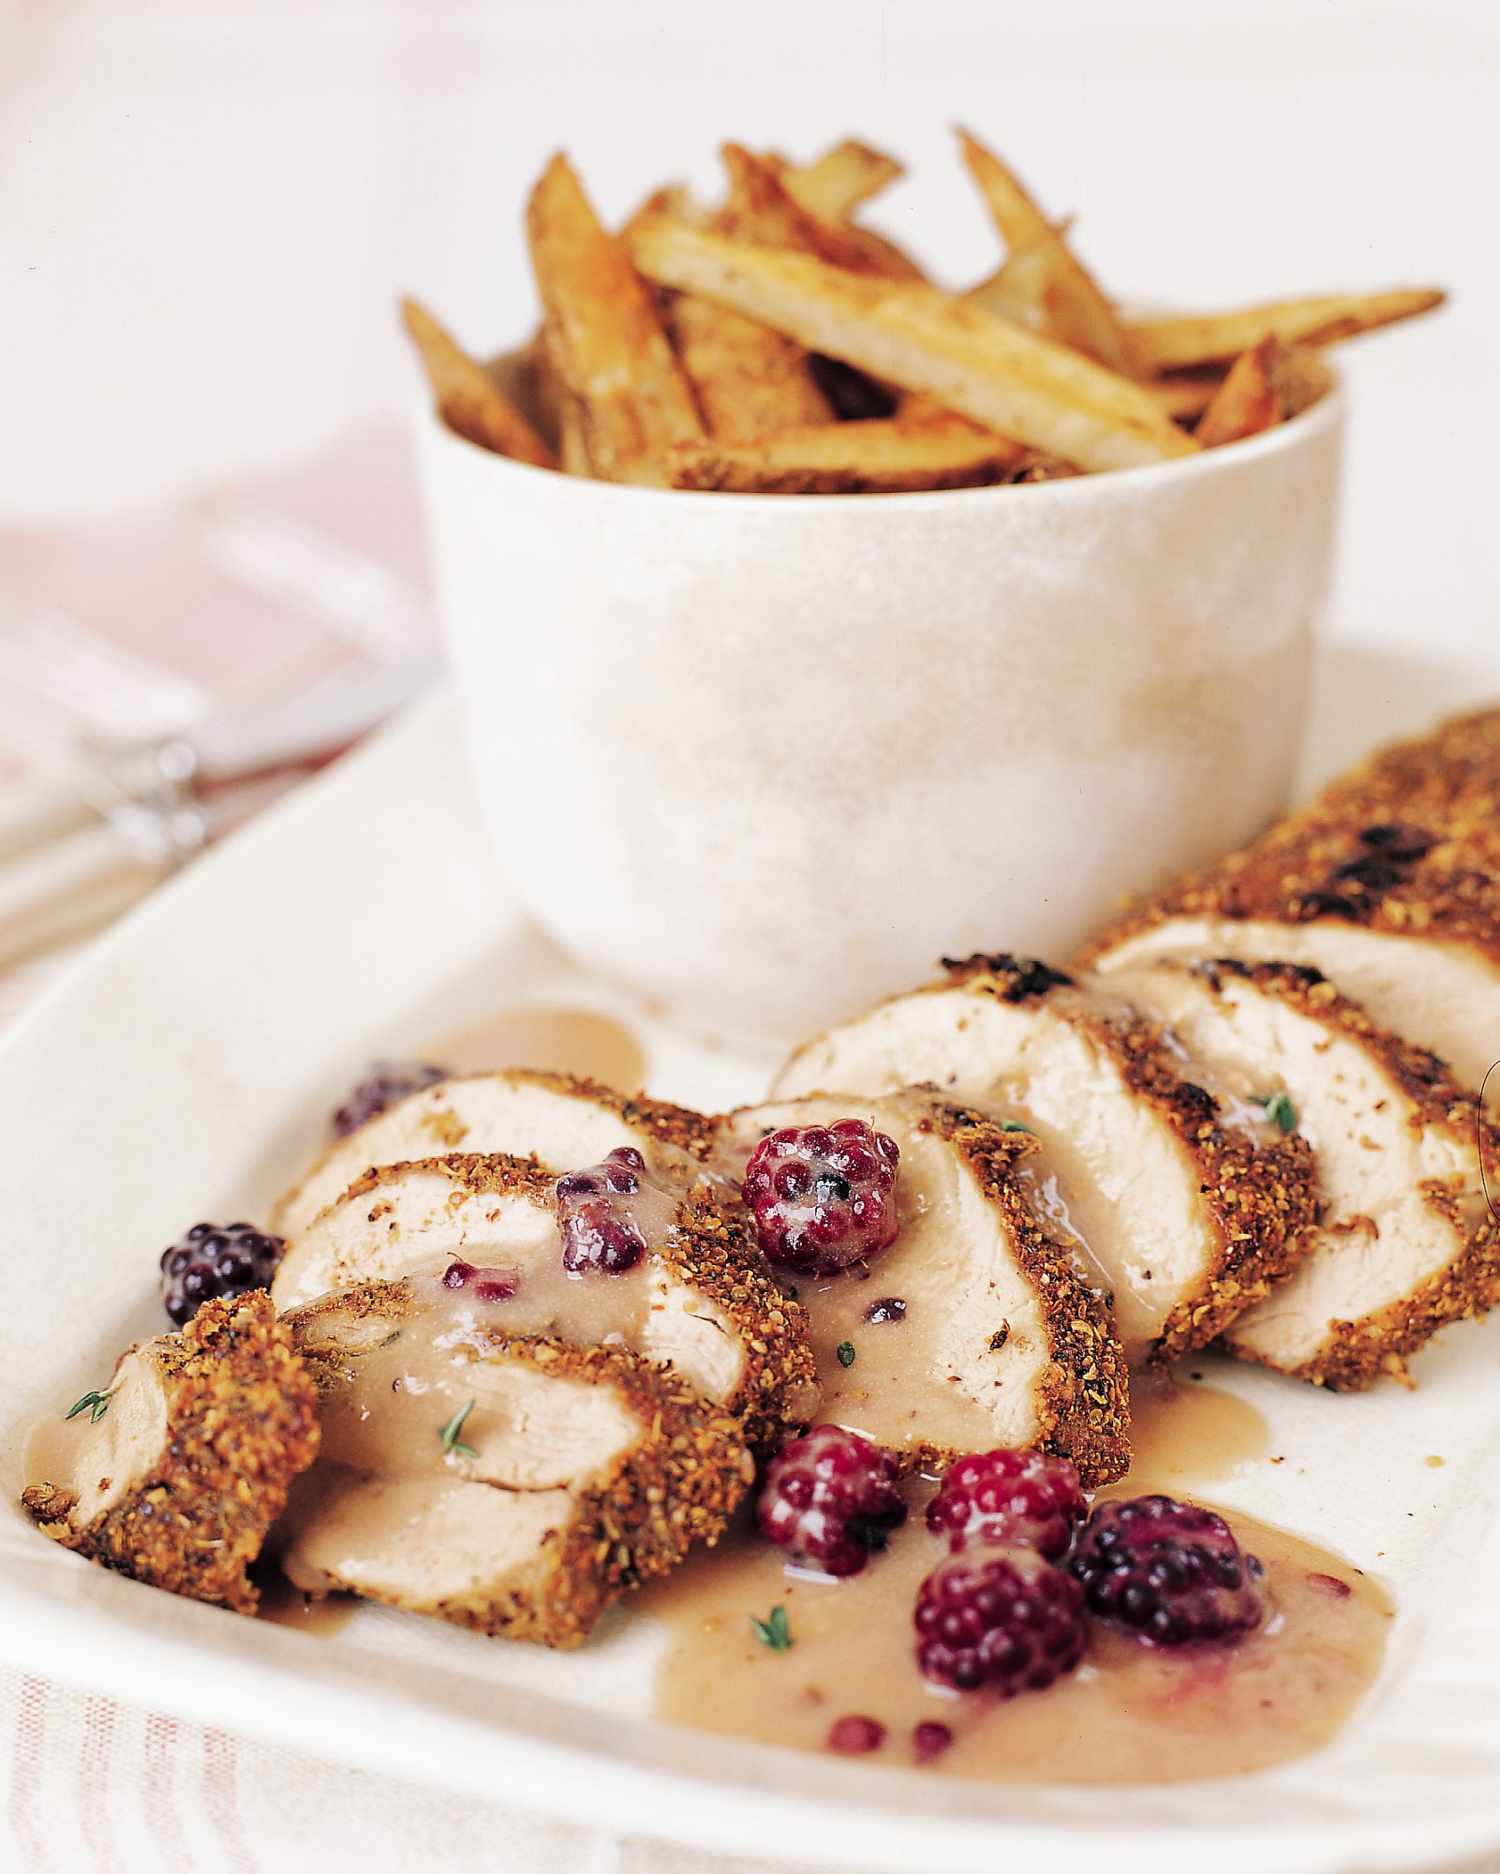 Mustard-Rubbed Pork with Blackberry-Mustard Sauce and Spiced Oven Fries